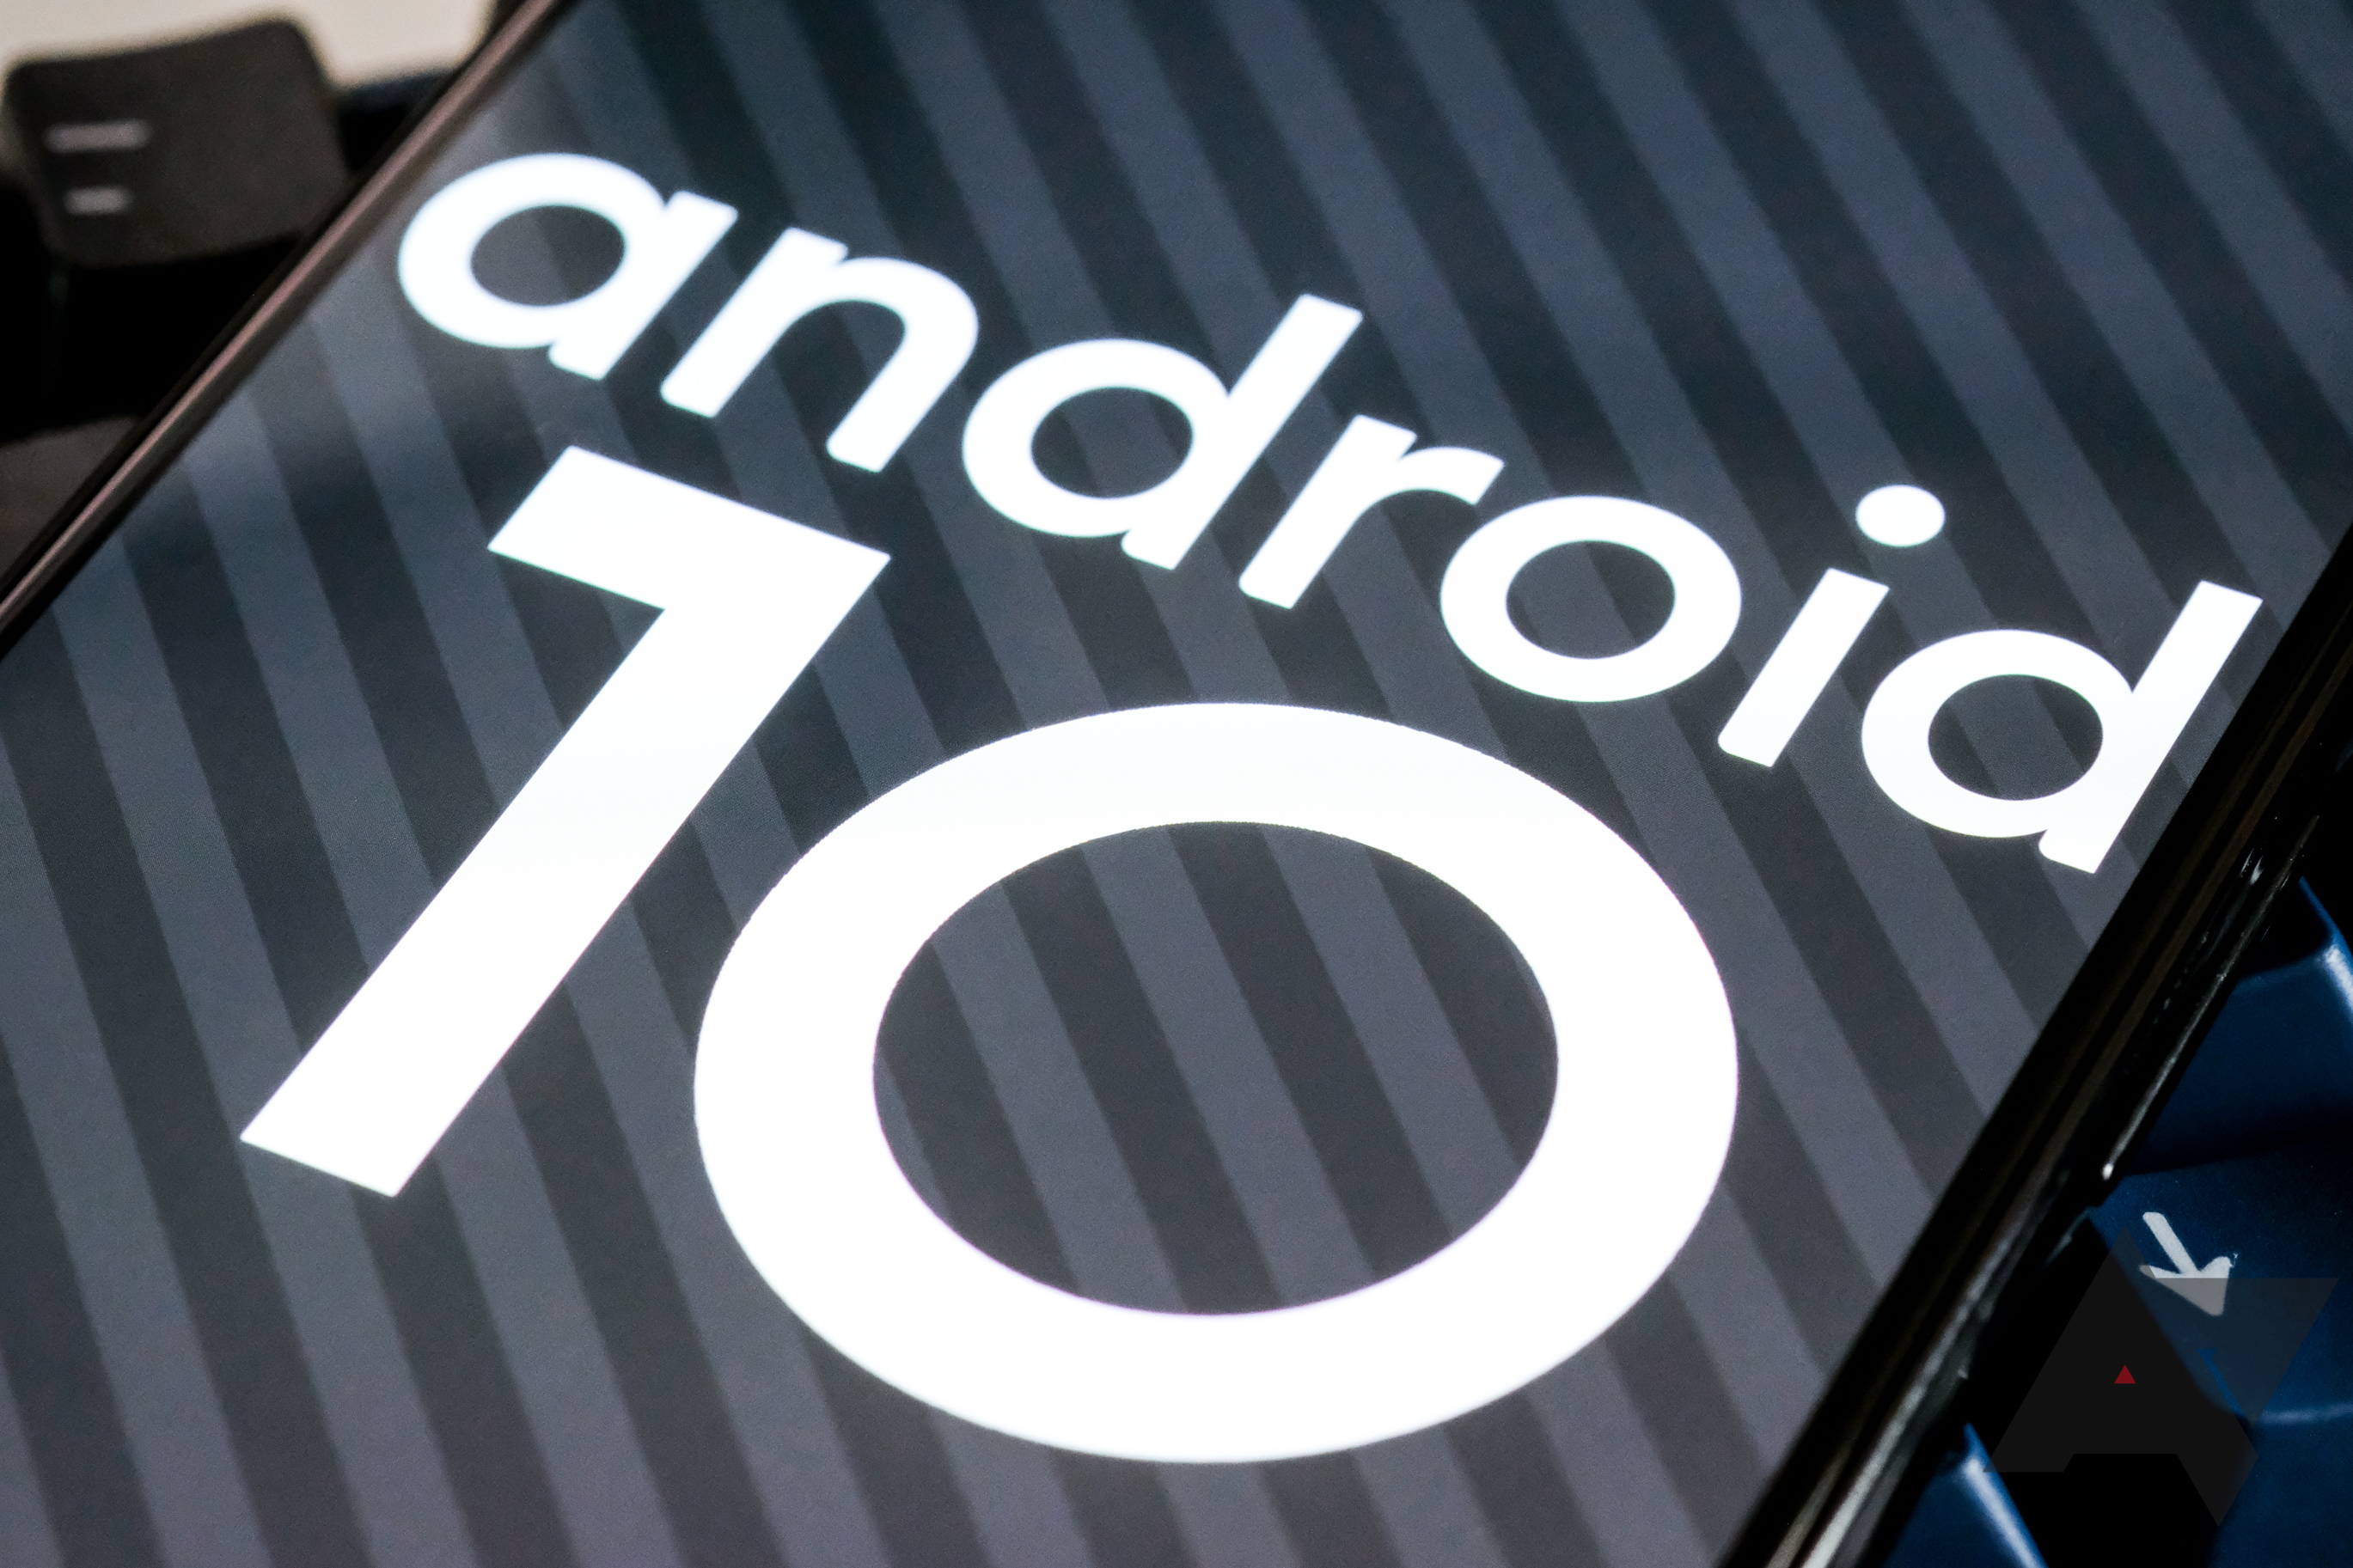 Android 10 has been the most quickly adopted Android update ever